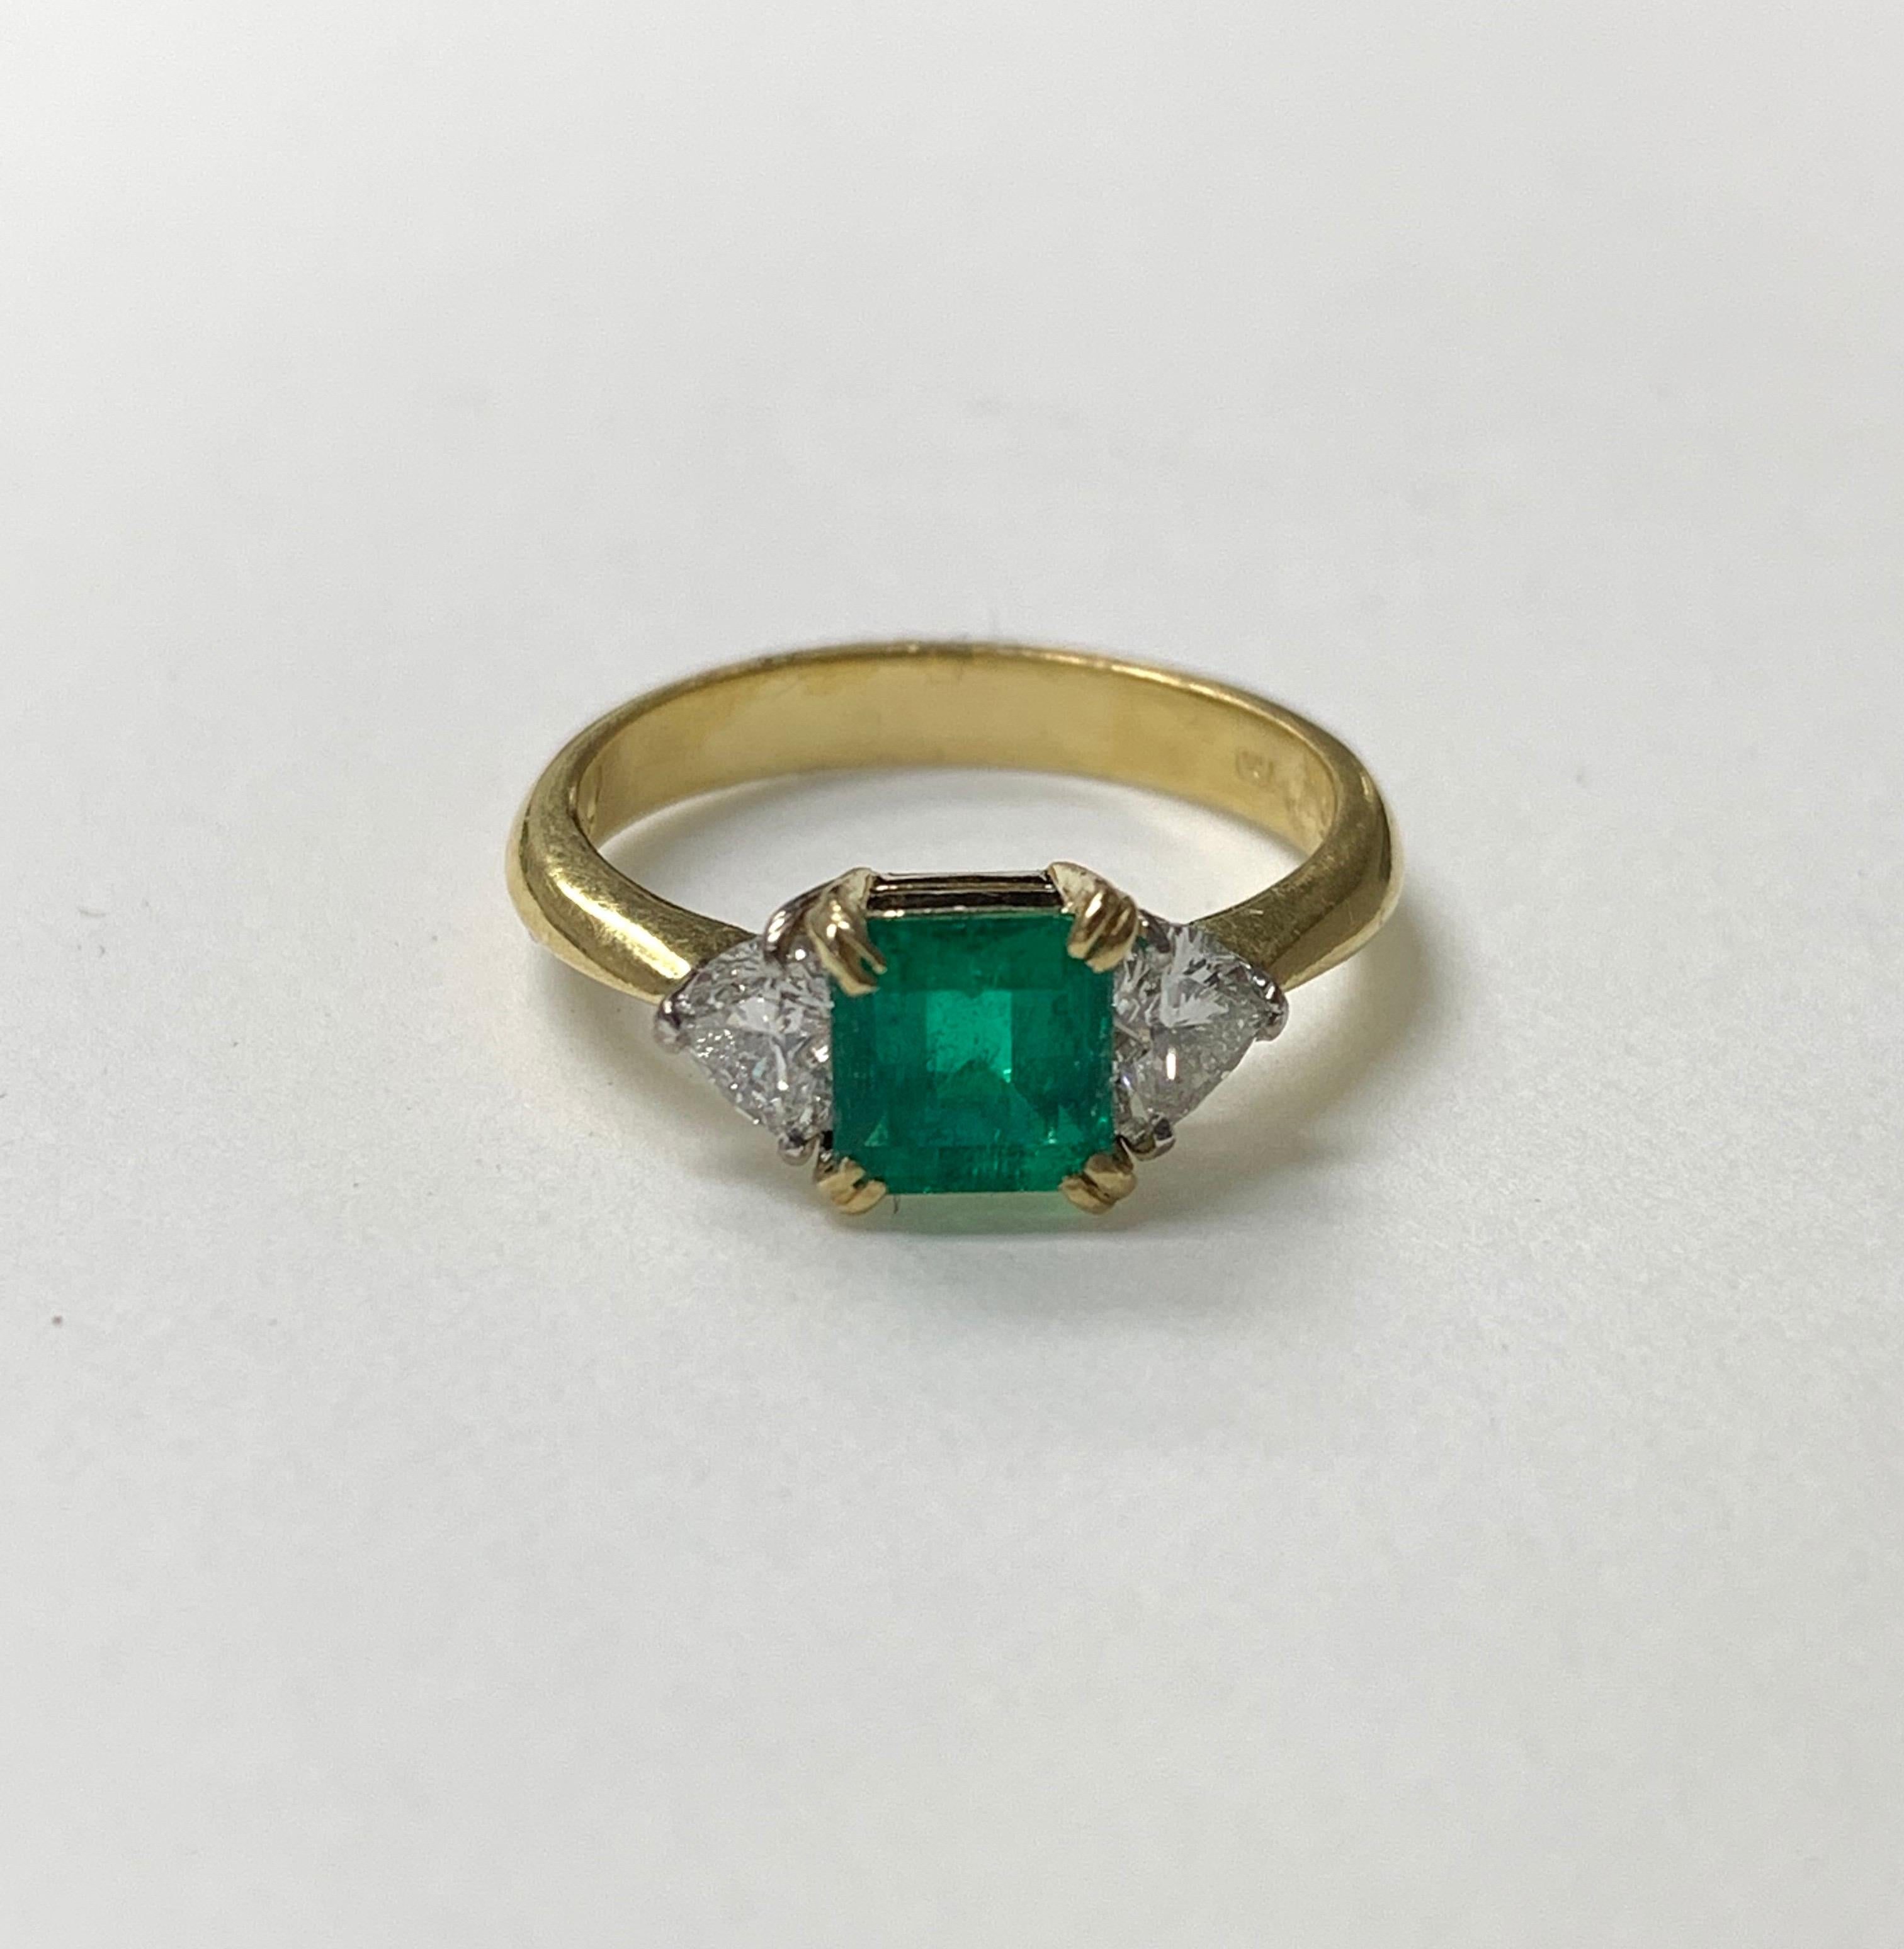 Very pretty emerald and diamond engagement ring is hand made in 18 k white gold. 
The details are as follows ; 
Emerald weight : 0.95 carat 
Diamond weight : 0.60 carat 
Ring size : 6 3/4 
Metal : 18 k white gold 

